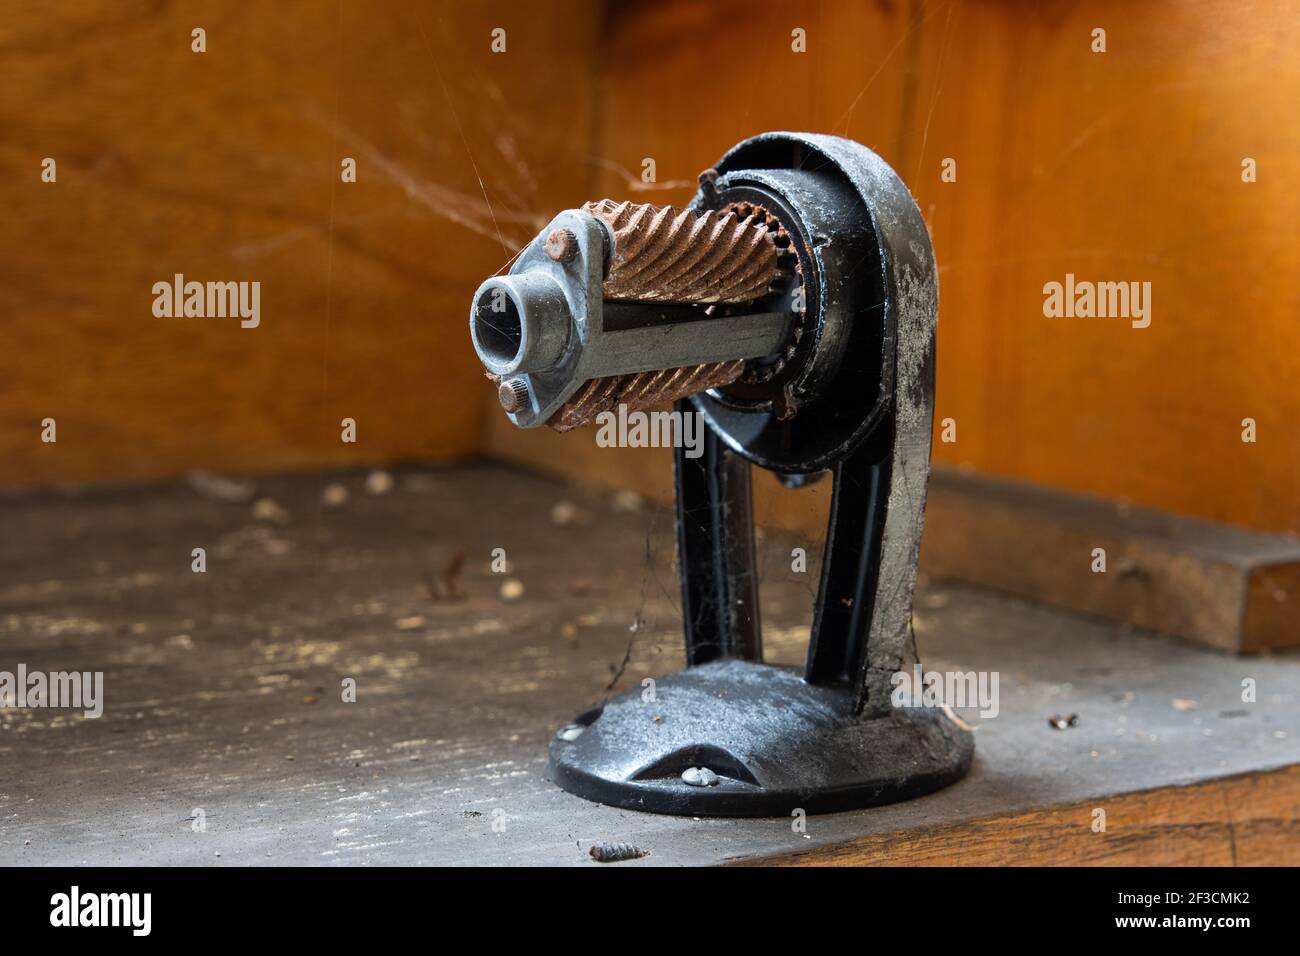 A manual pencil sharpener is tethered to cobwebs an in abandoned school building. Stock Photo